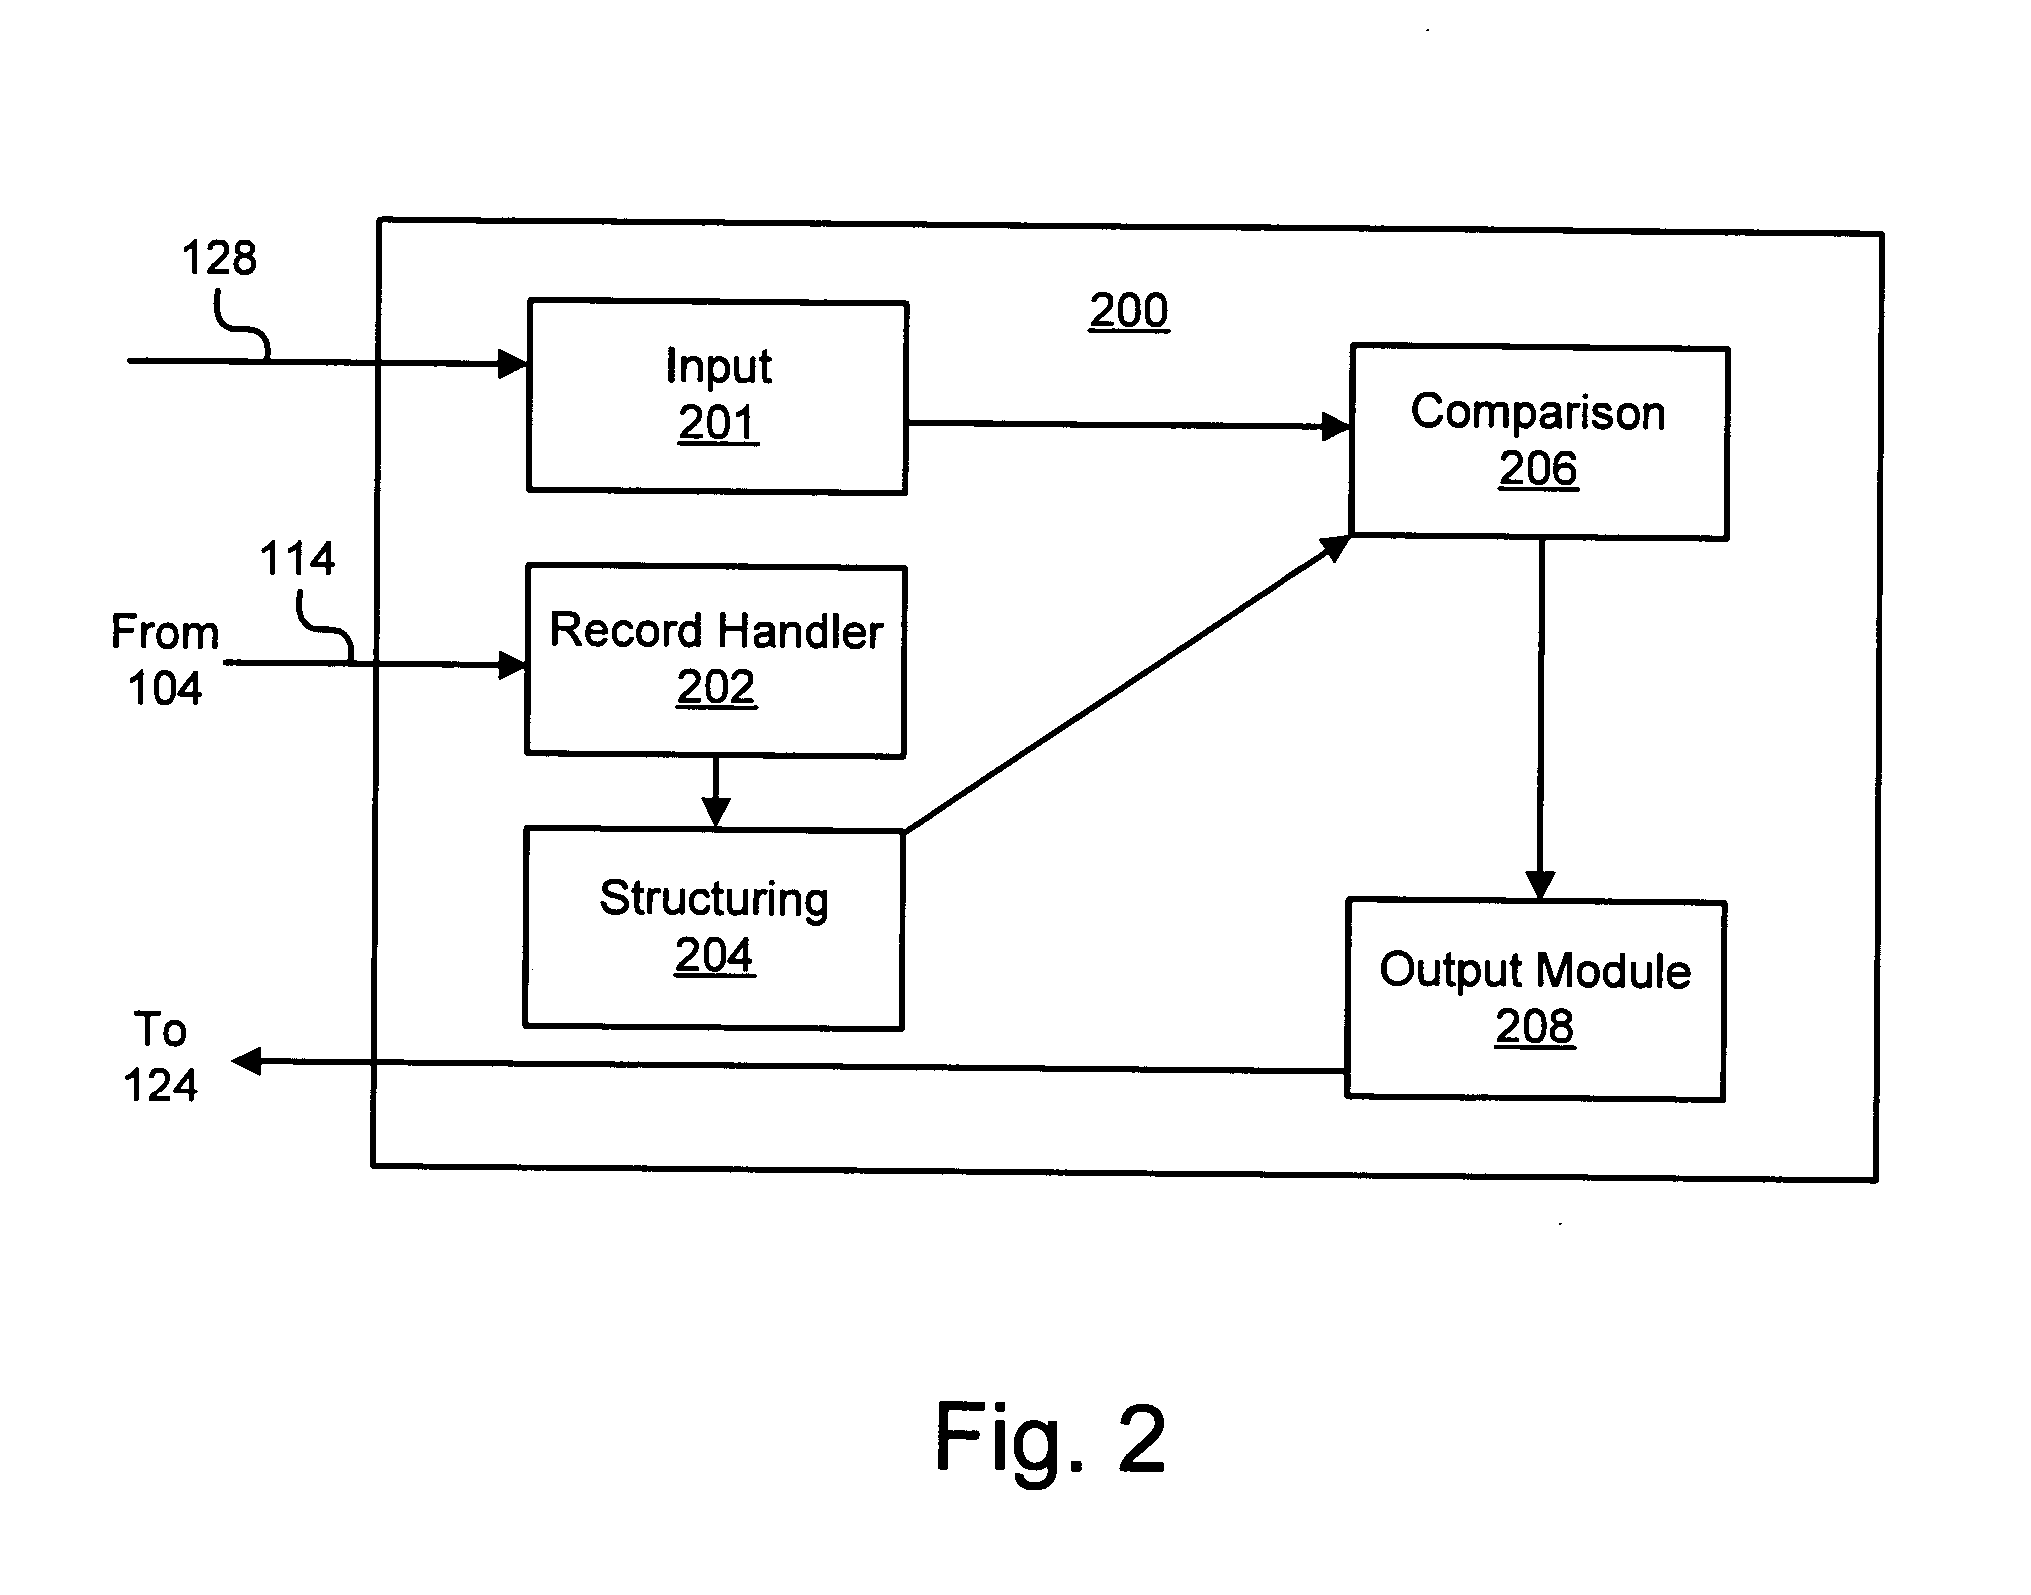 Apparatus, system, and method for condensing reported checkpoint log data